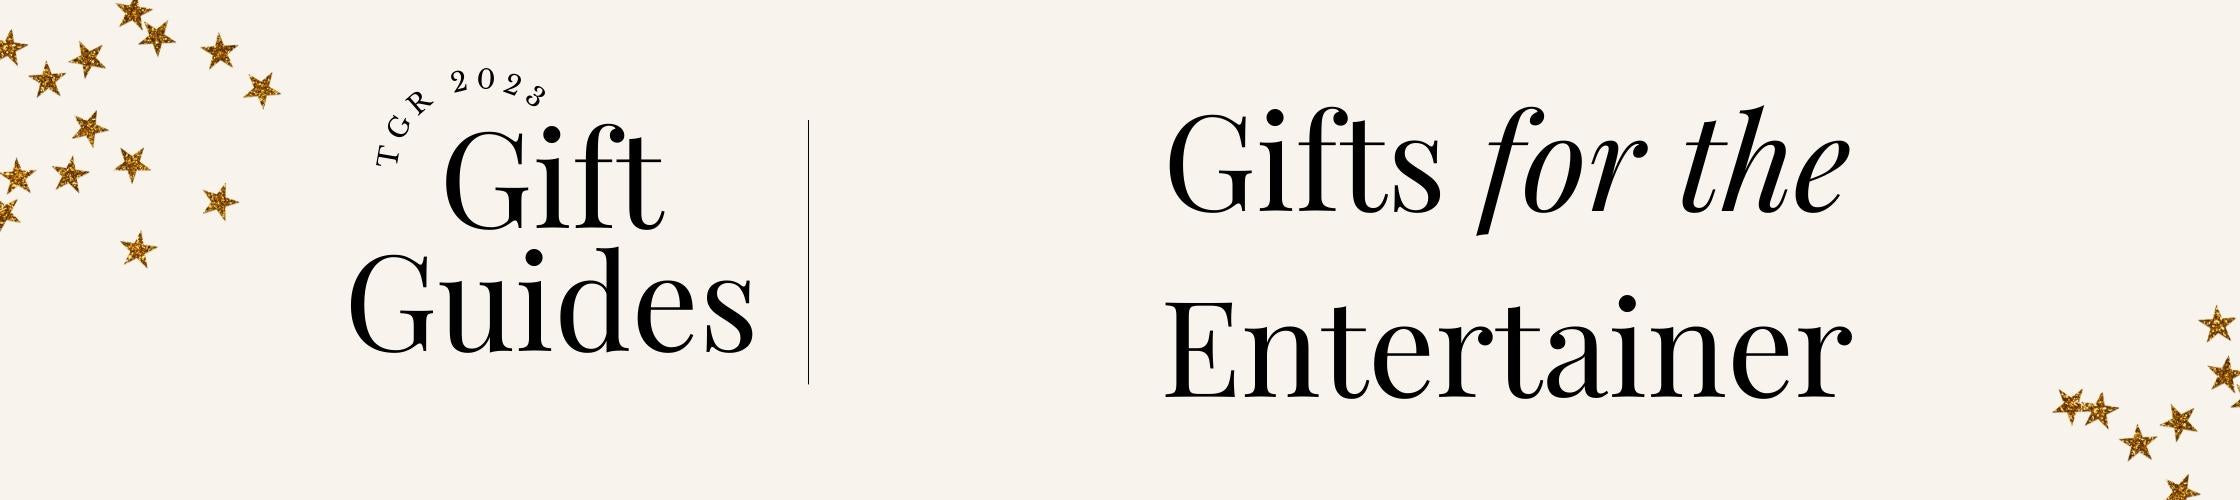 2023 Holiday Gift Guides: Gifts for the Entertainer